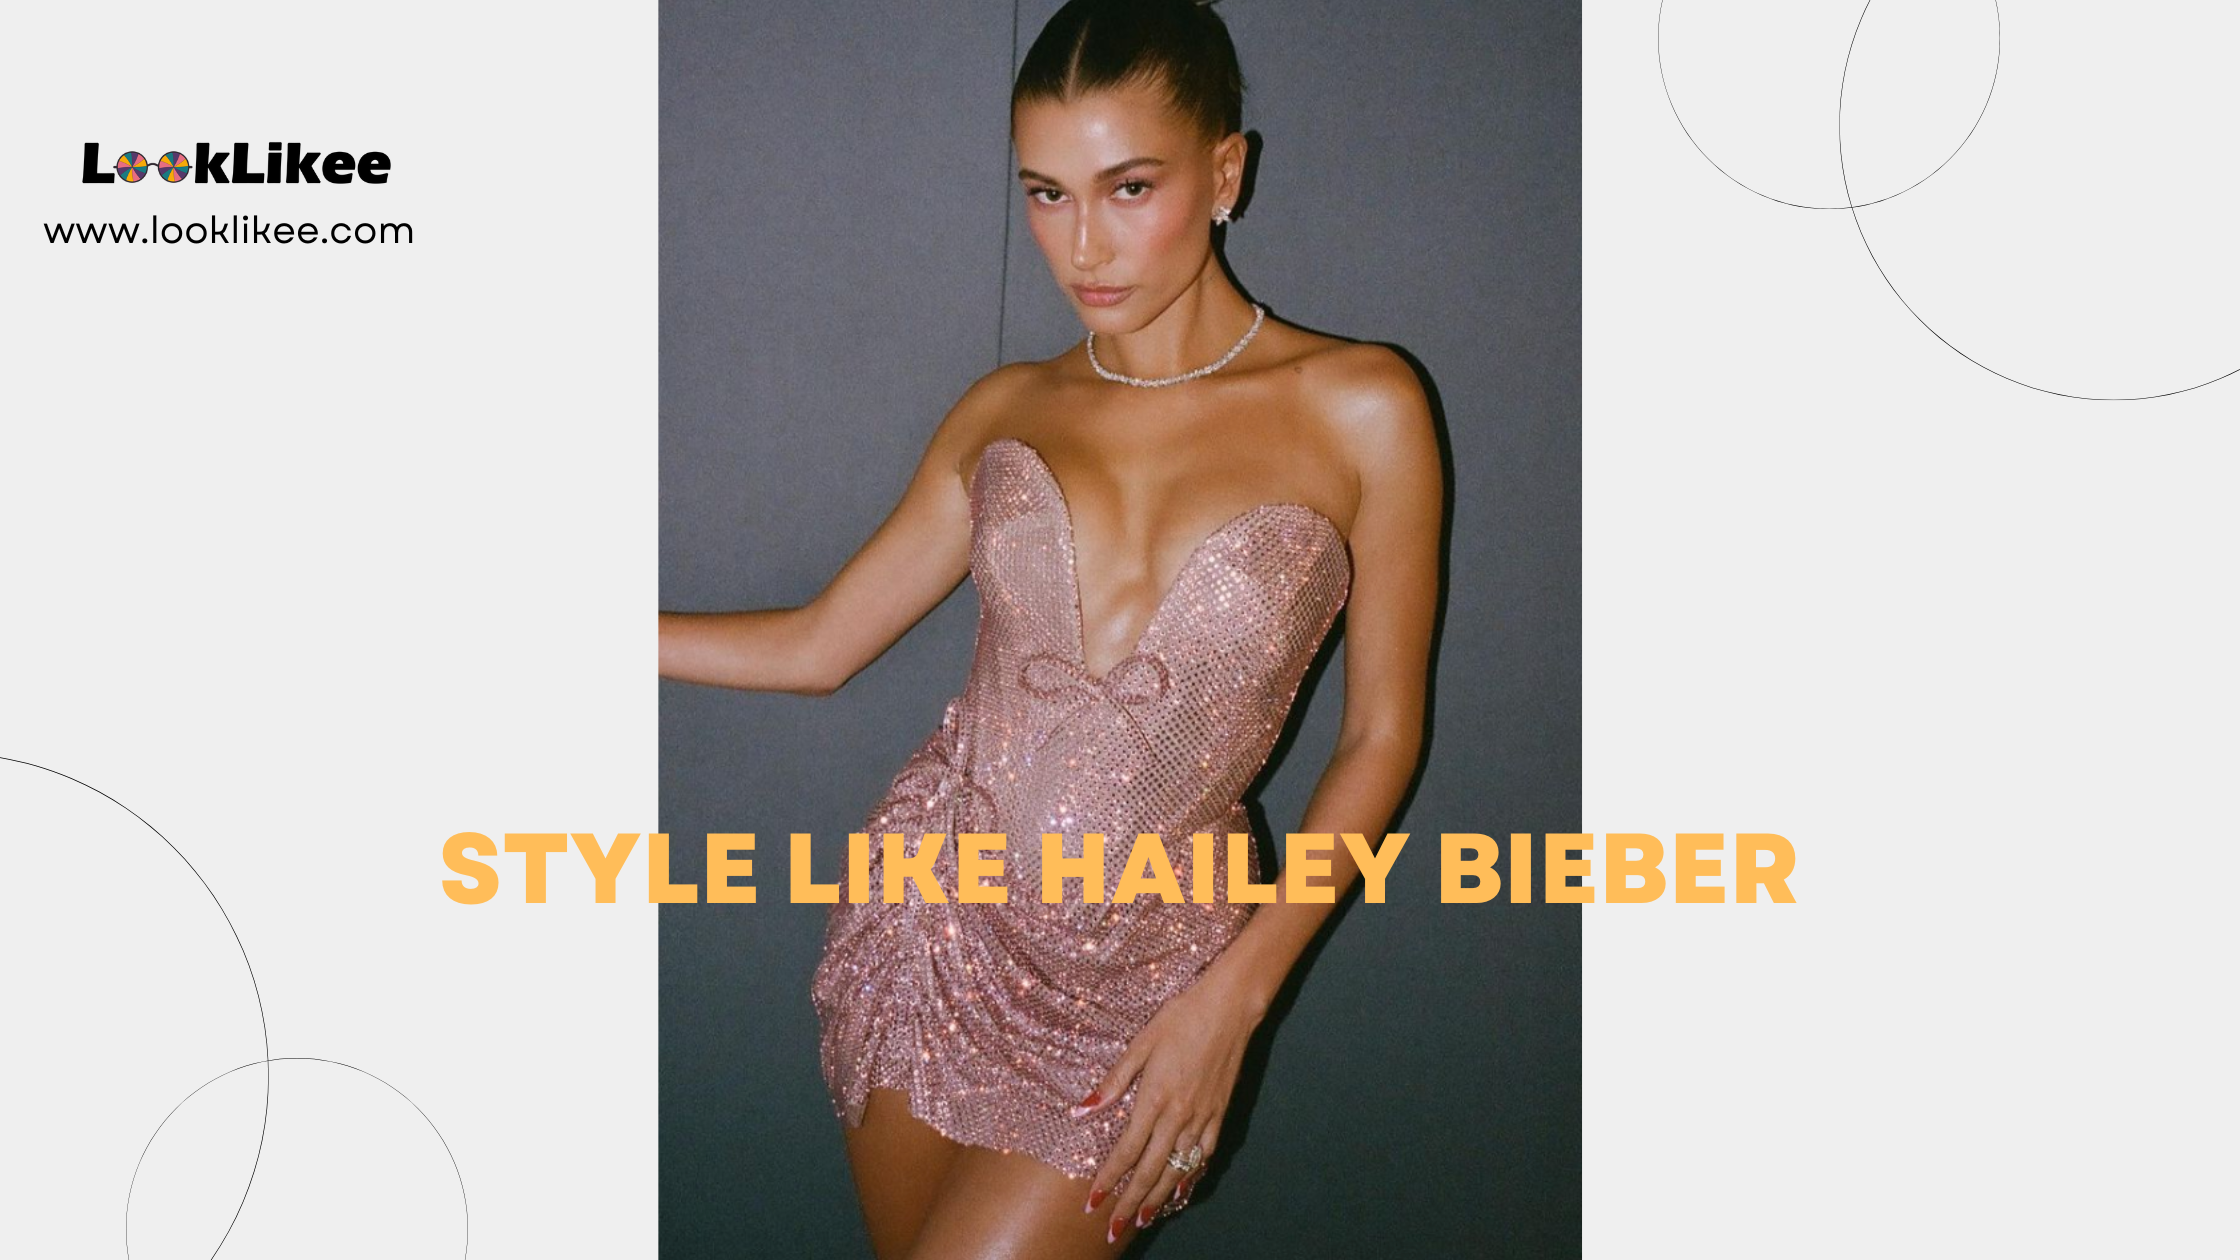 How to Dress Like Hailey Baldwin Bieber and Nail Her Chic Style